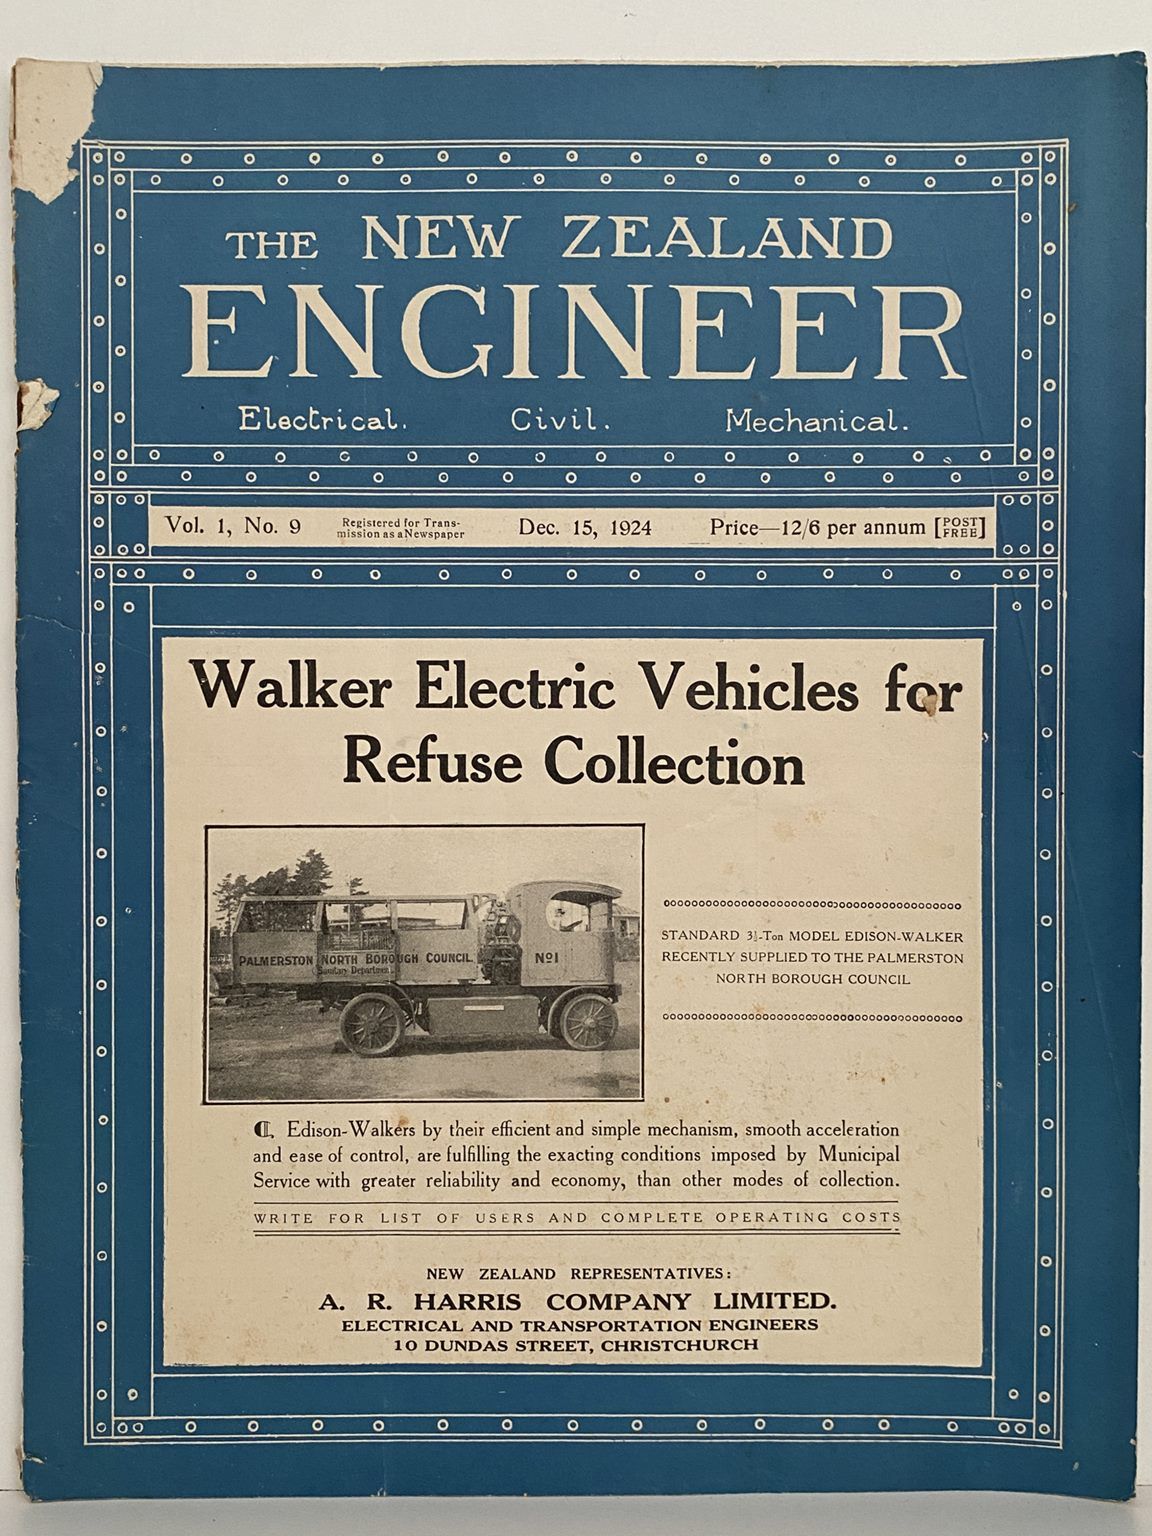 OLD MAGAZINE: The New Zealand Engineer Vol. 1, No. 9 - 15 December 1924